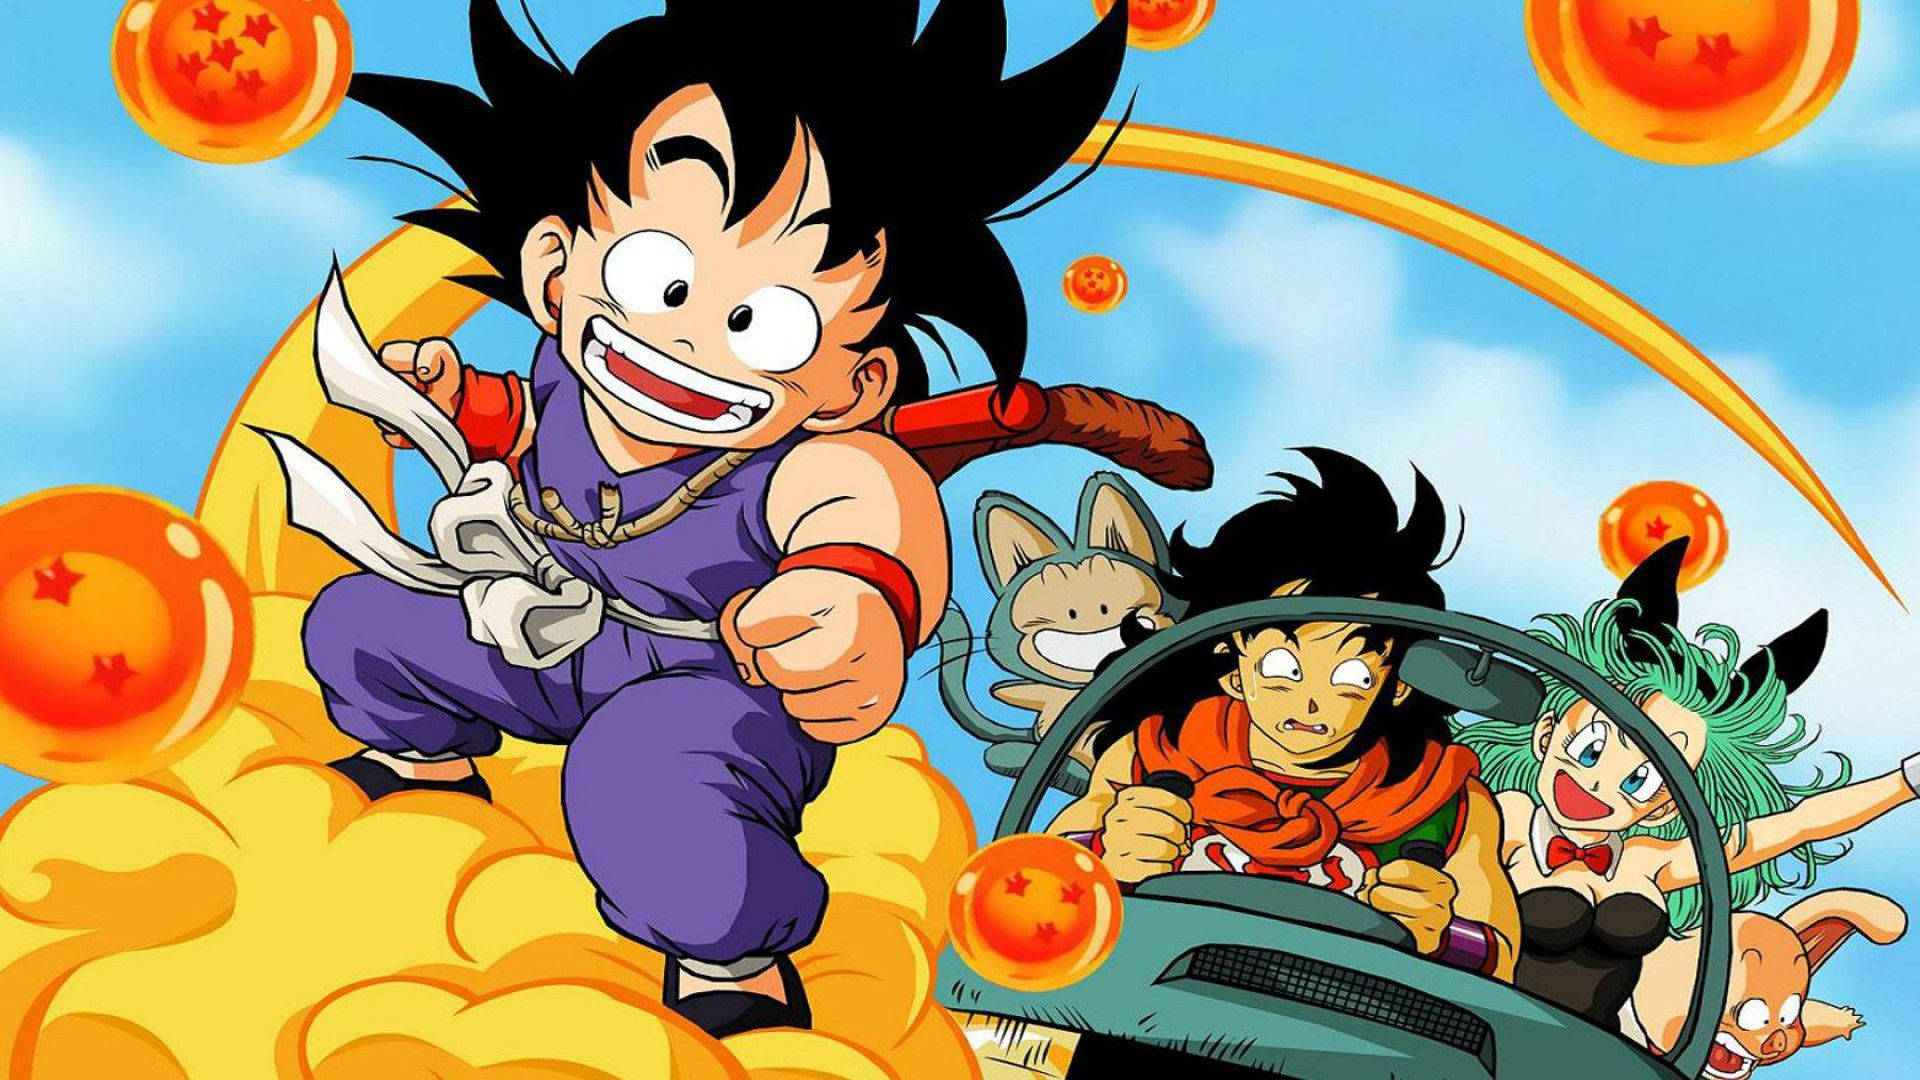 Dragon Ball 1920X1080 Wallpaper and Background Image